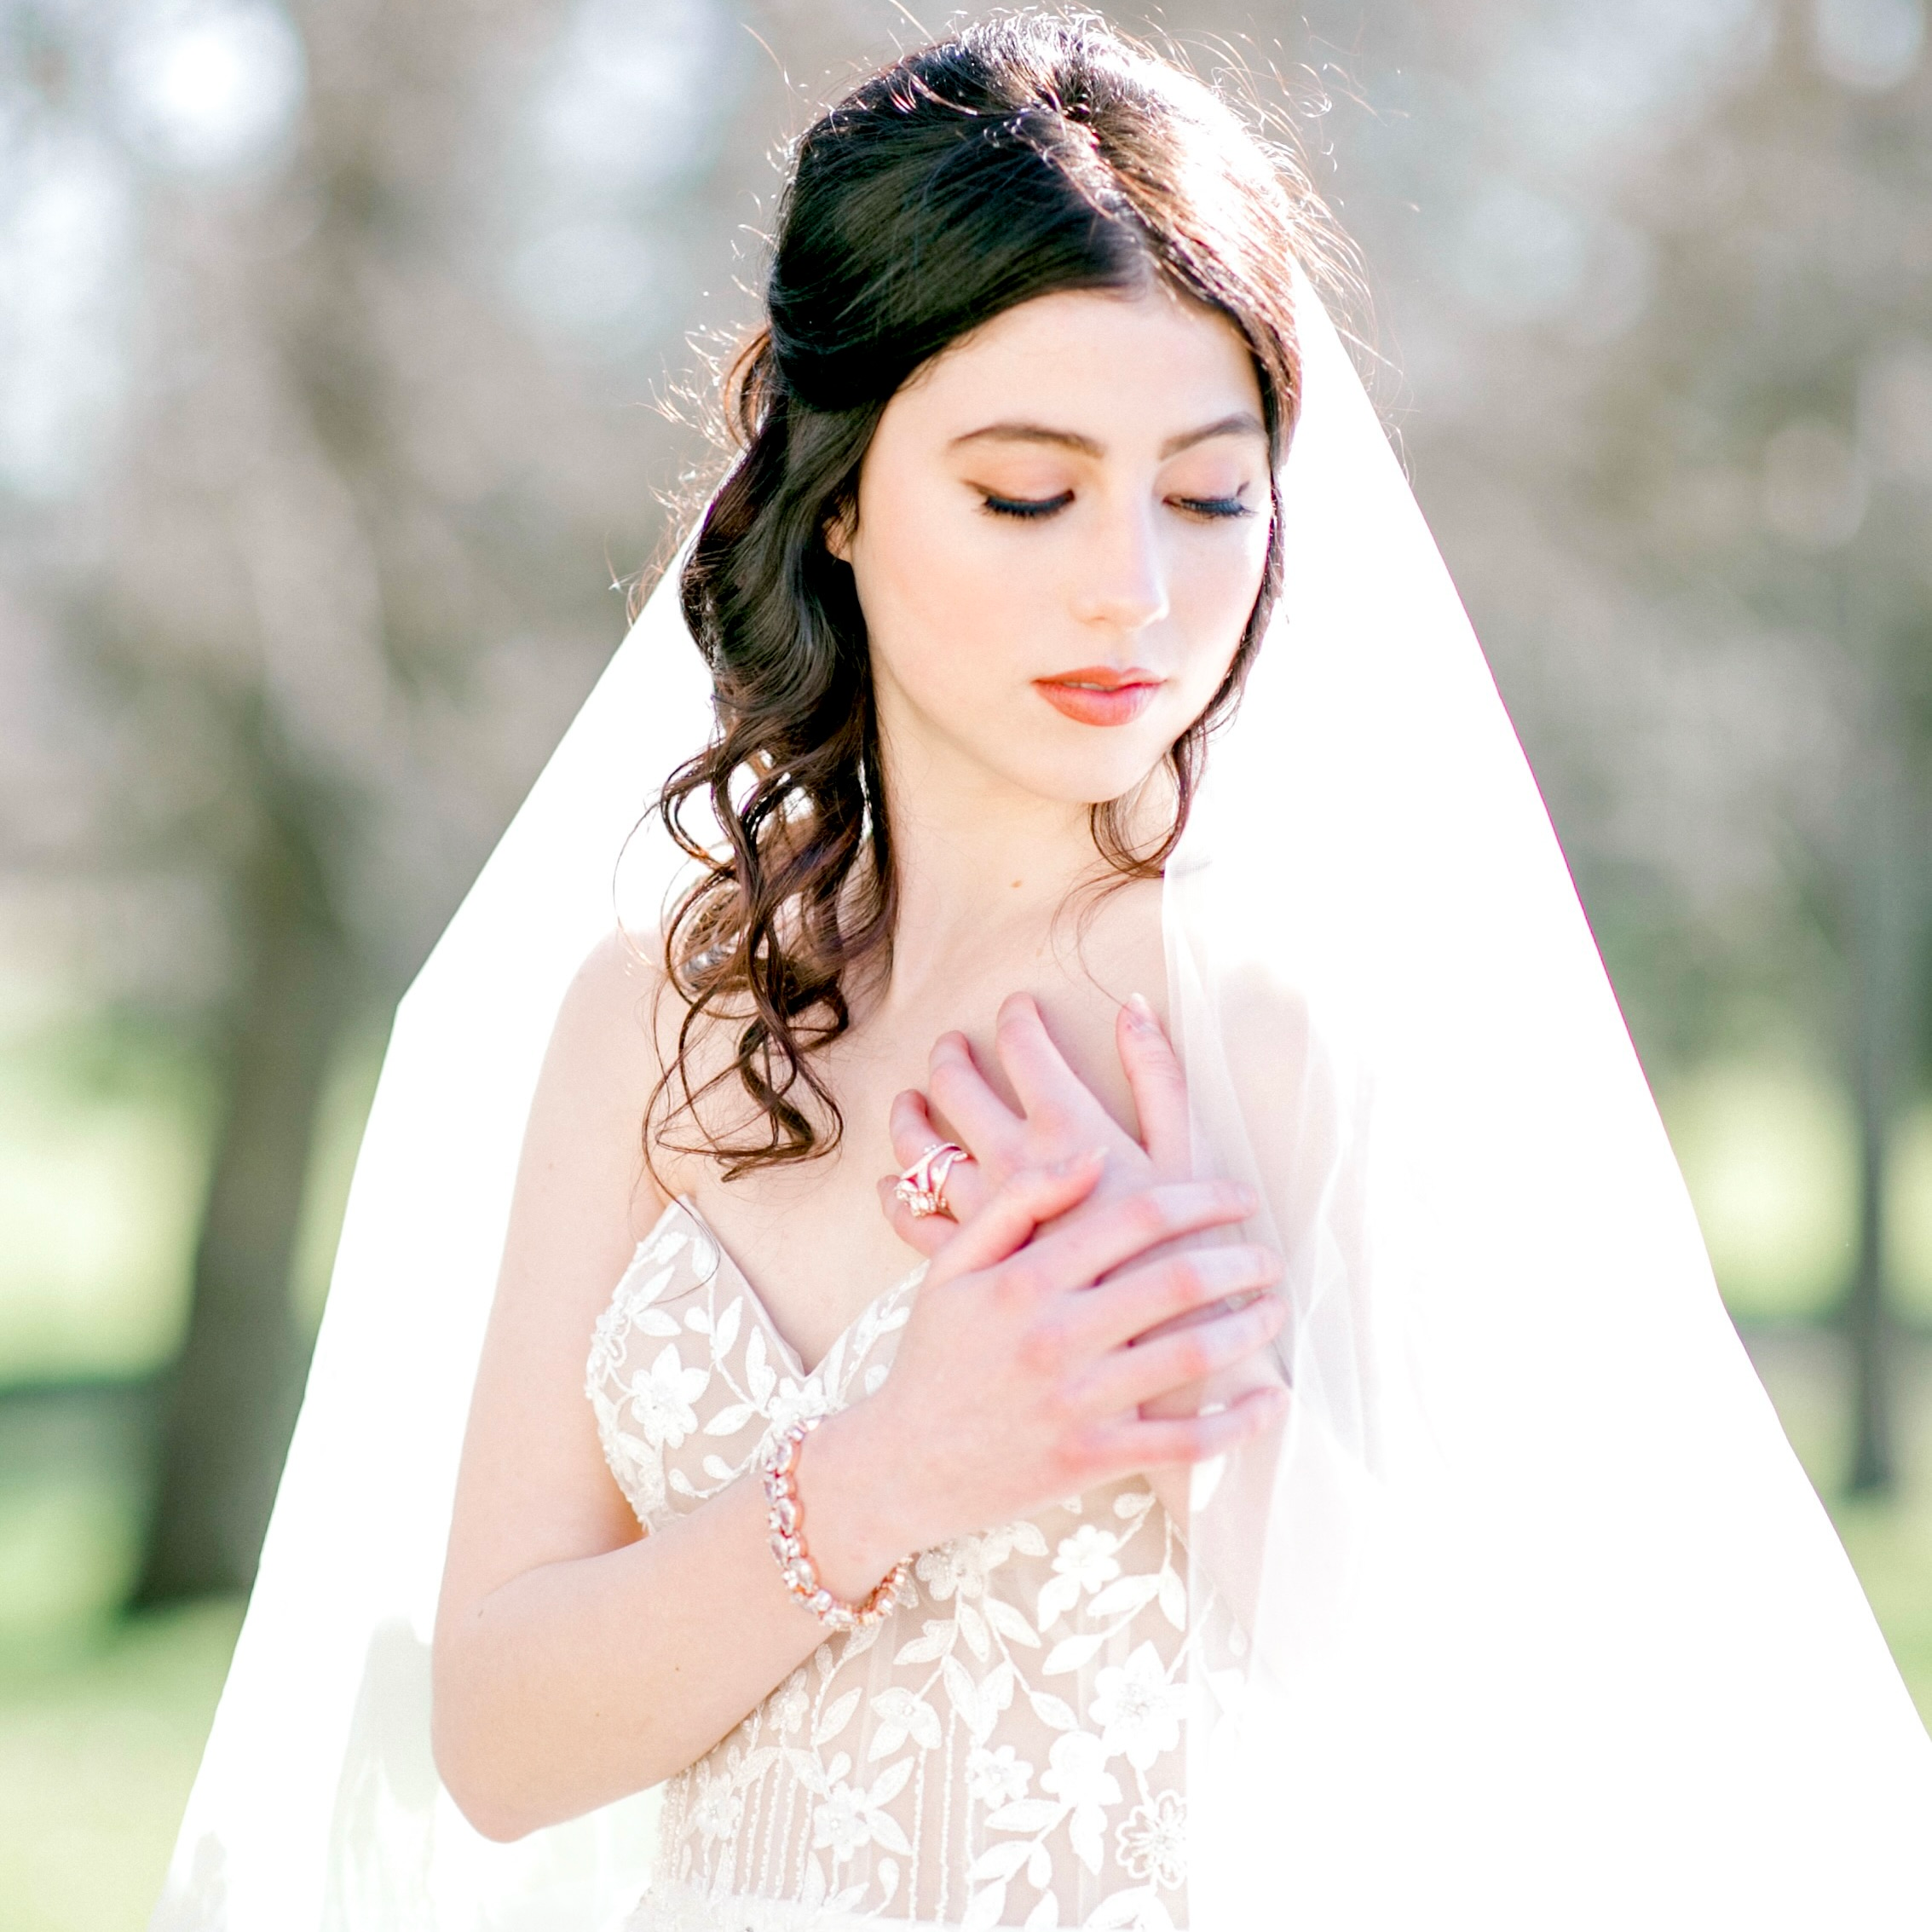 Adora by Simona Wedding Veils - Raw- Edge 2-Tier Fingertip Bridal Veil - Available in White, Off-White and Ivory White